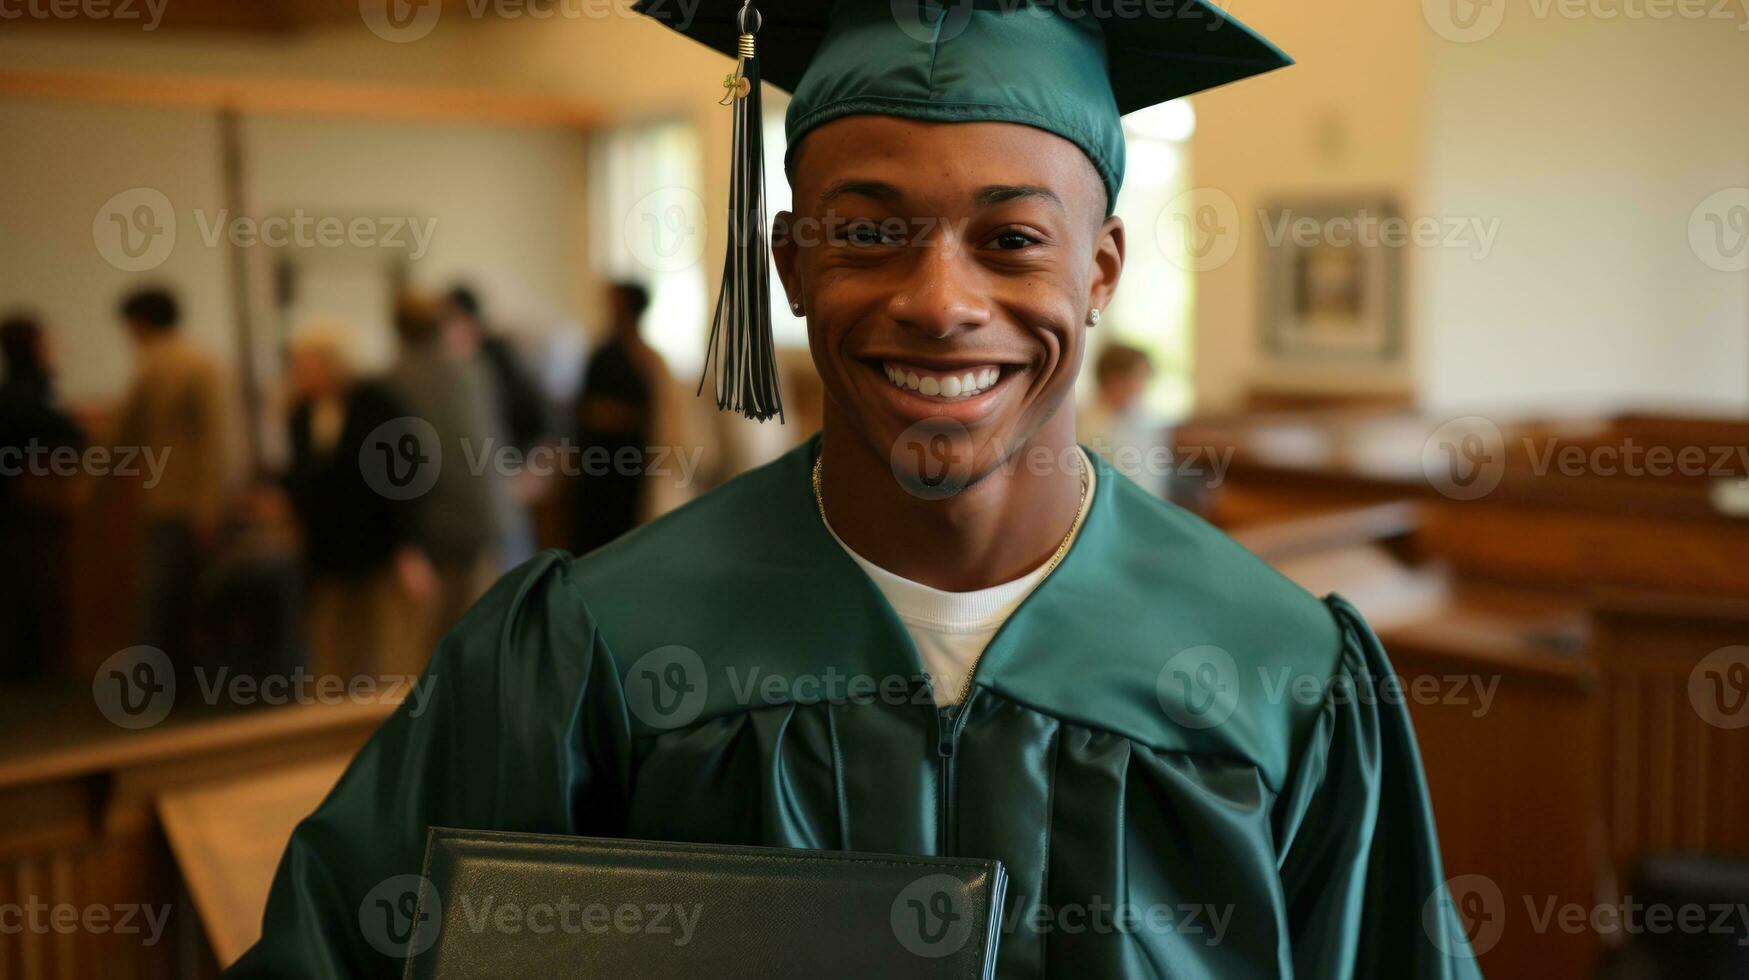 Homeless youth proudly displaying graduation cap after overcoming countless challenges photo